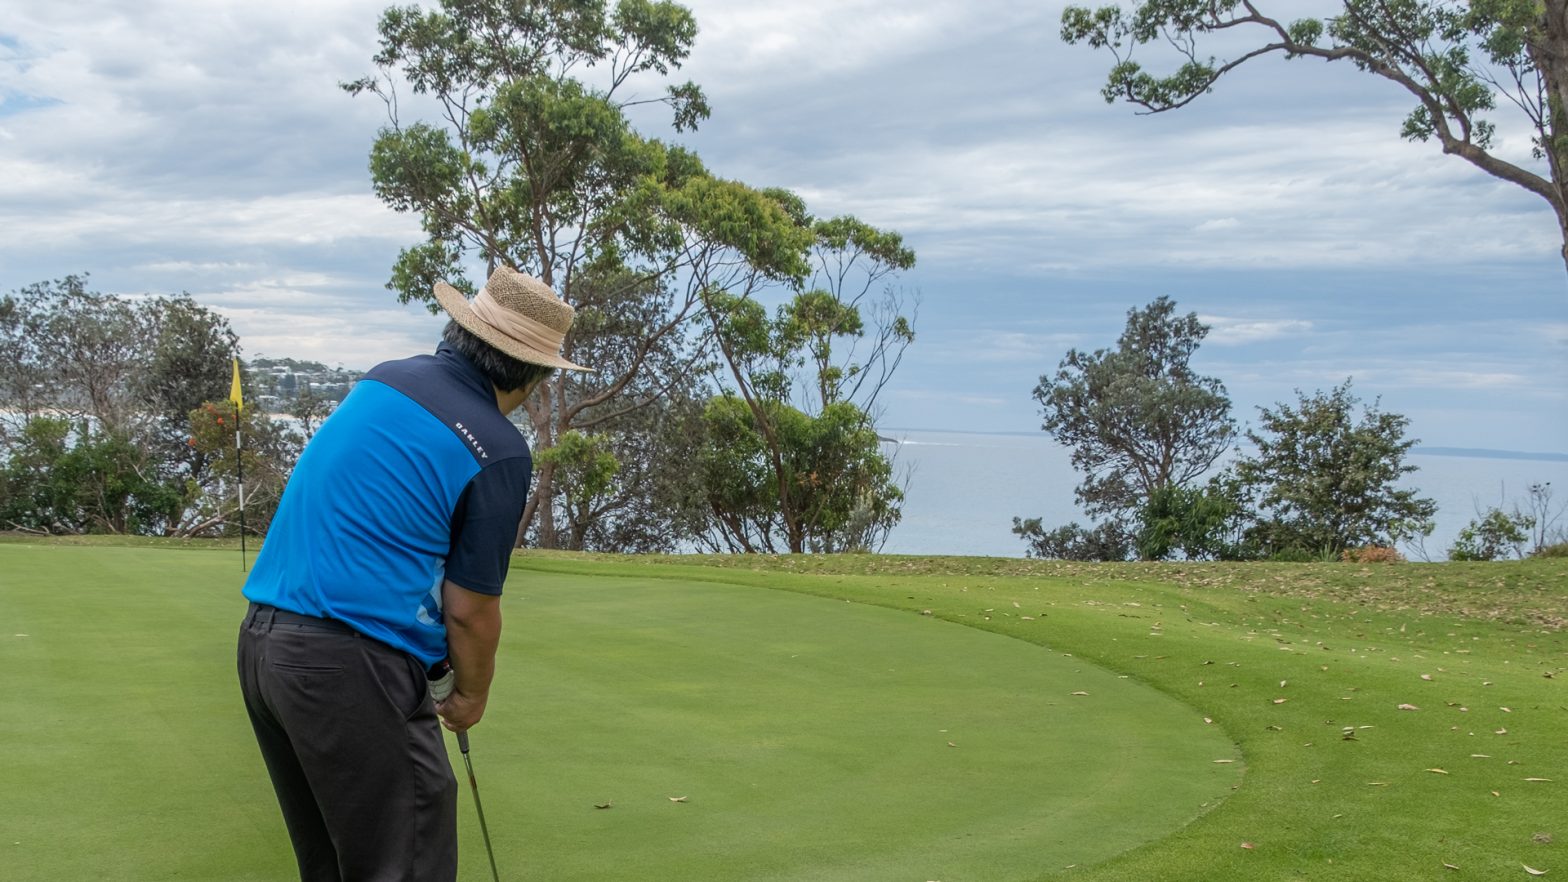 Aung playing golf at Mollymook